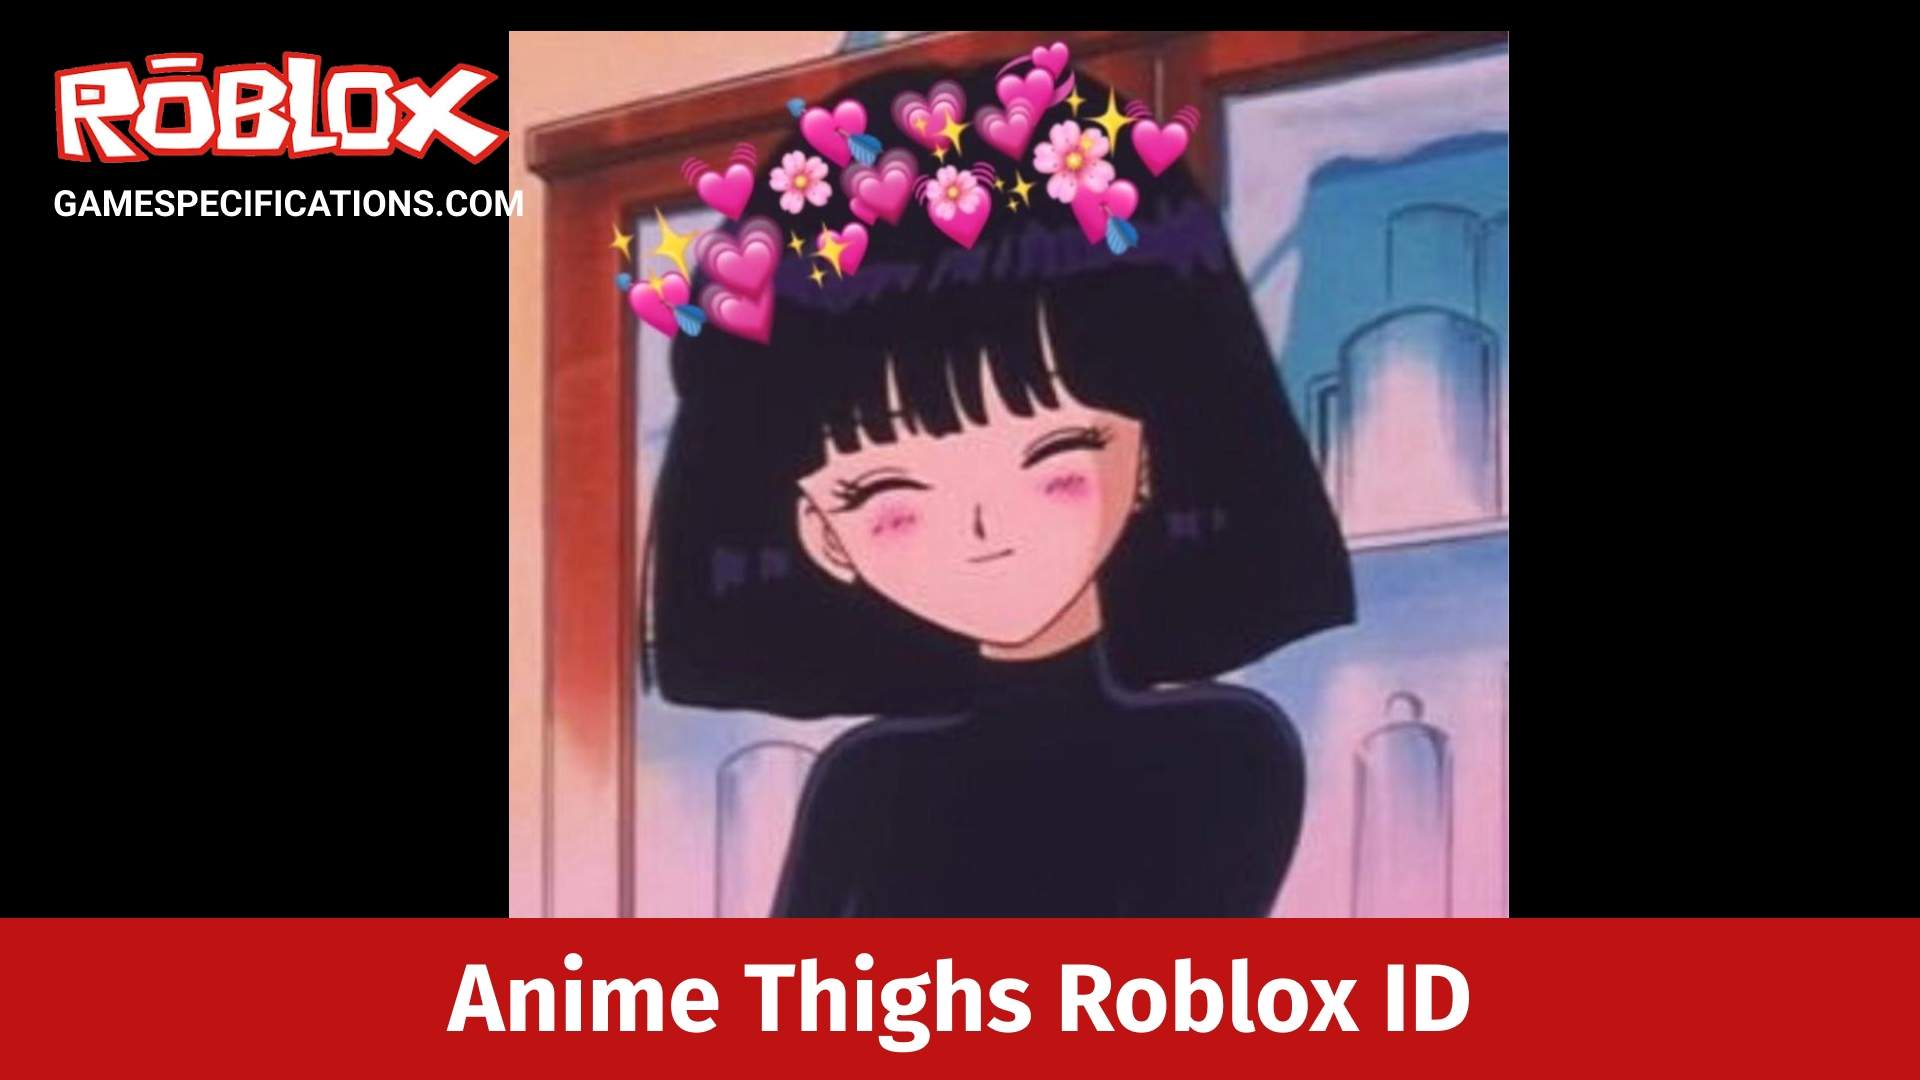 Anime Thighs Roblox ID Code [2022] - Game Specifications